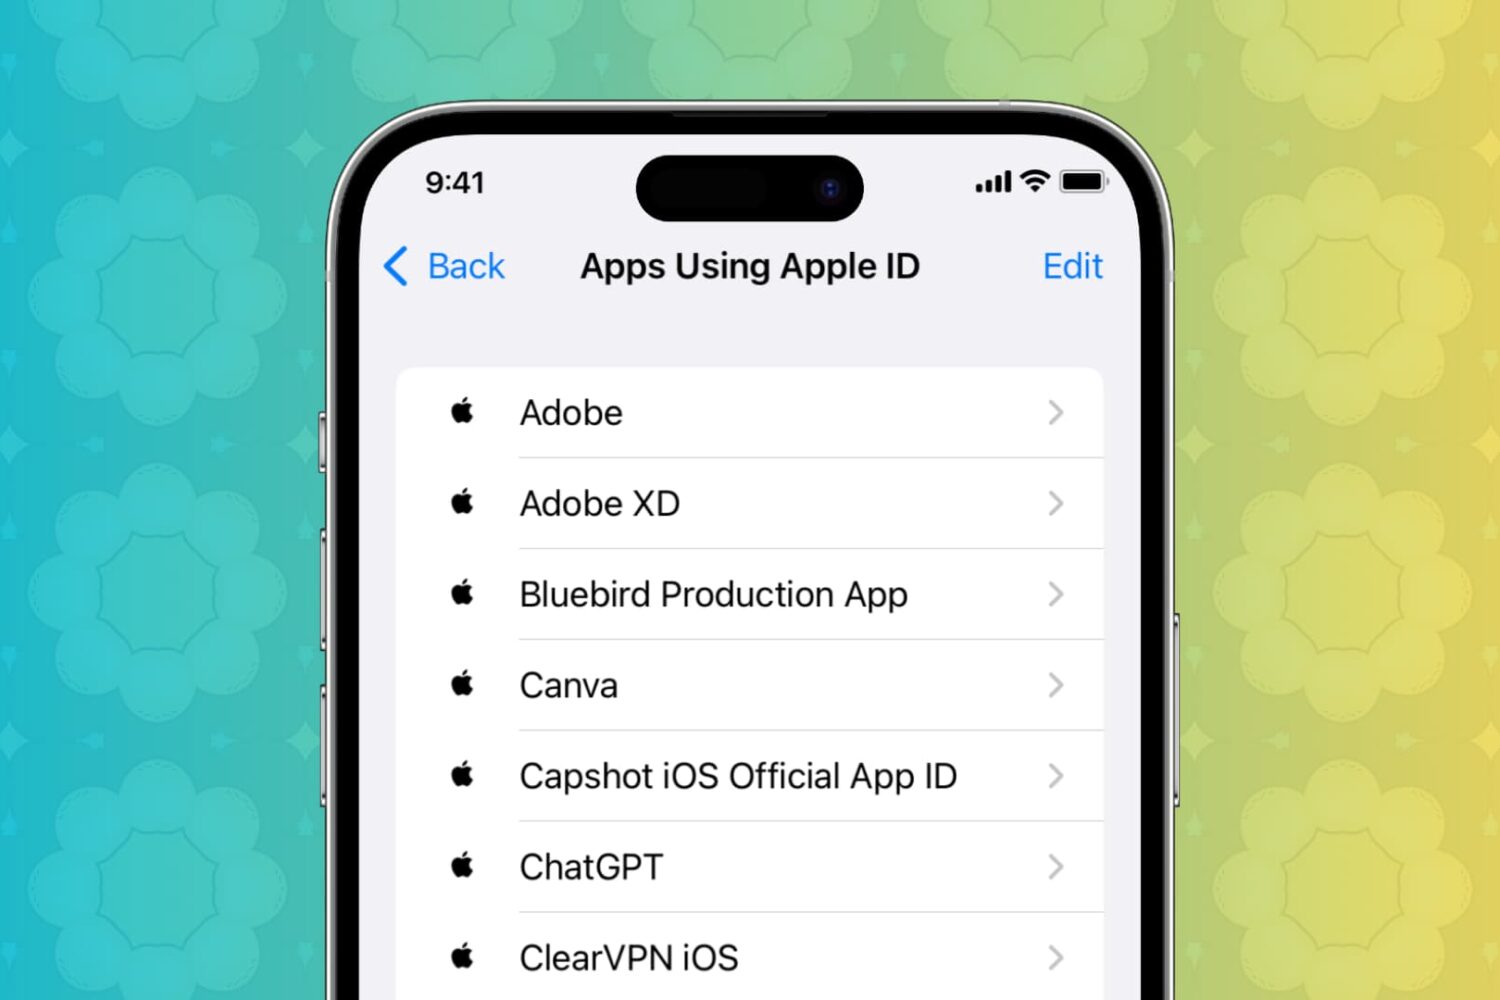 Apps using Apple ID listed in iPhone settings